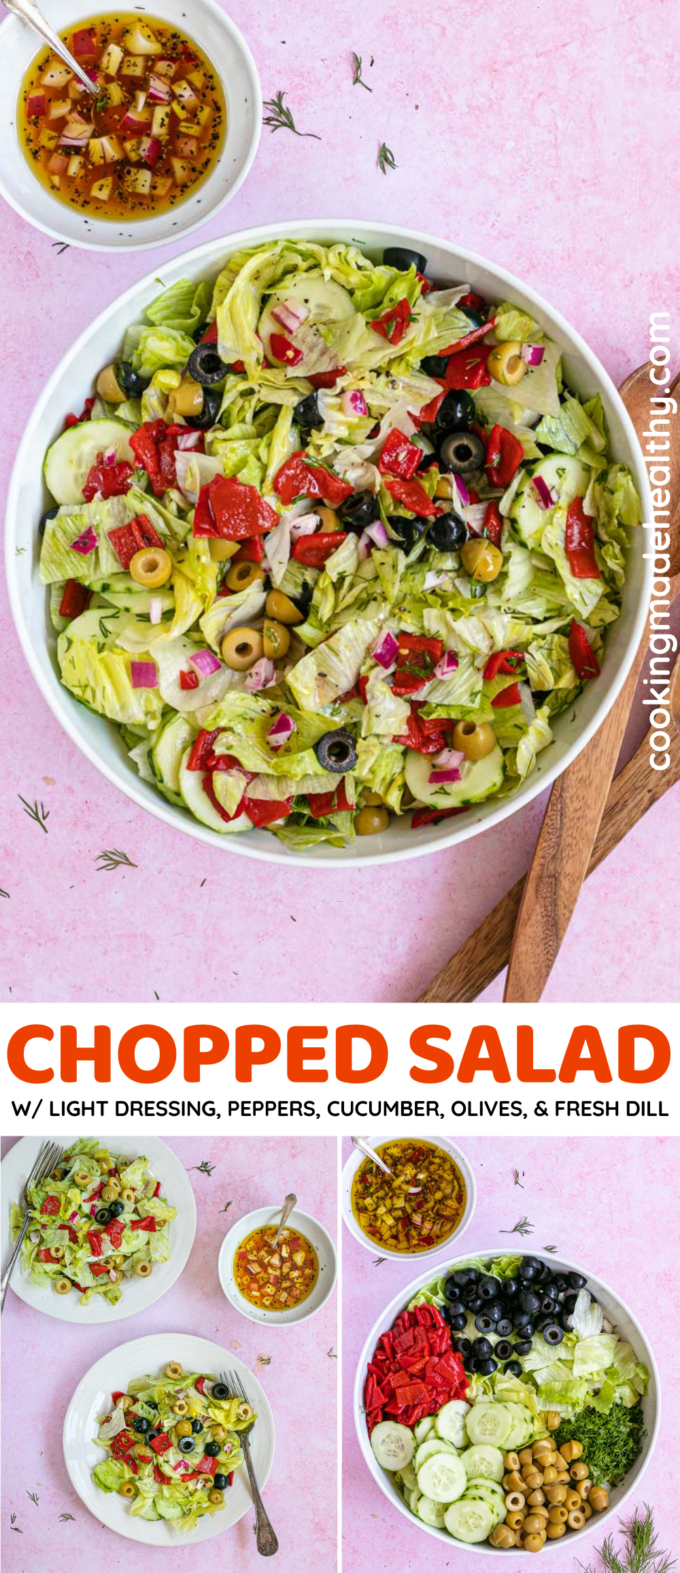 Chopped Salad Collage